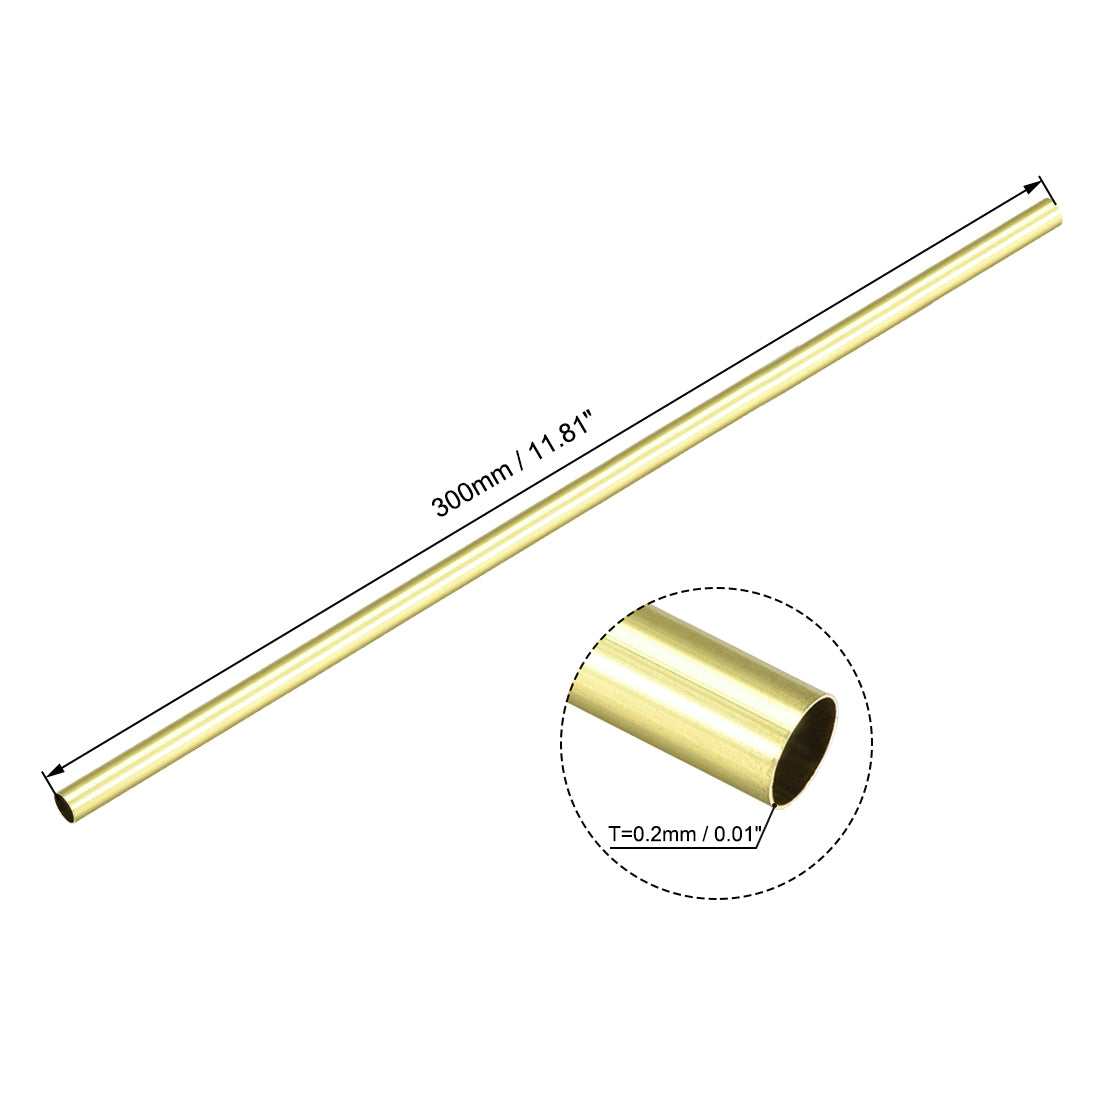 uxcell Uxcell Brass Tube, 4mm 4.5mm 5mm 5.5mm 6mm 6.5mm OD X 0.2mm Wall Thickness 300mm Length Seamless Round Pipe Tubing, Pack of 6